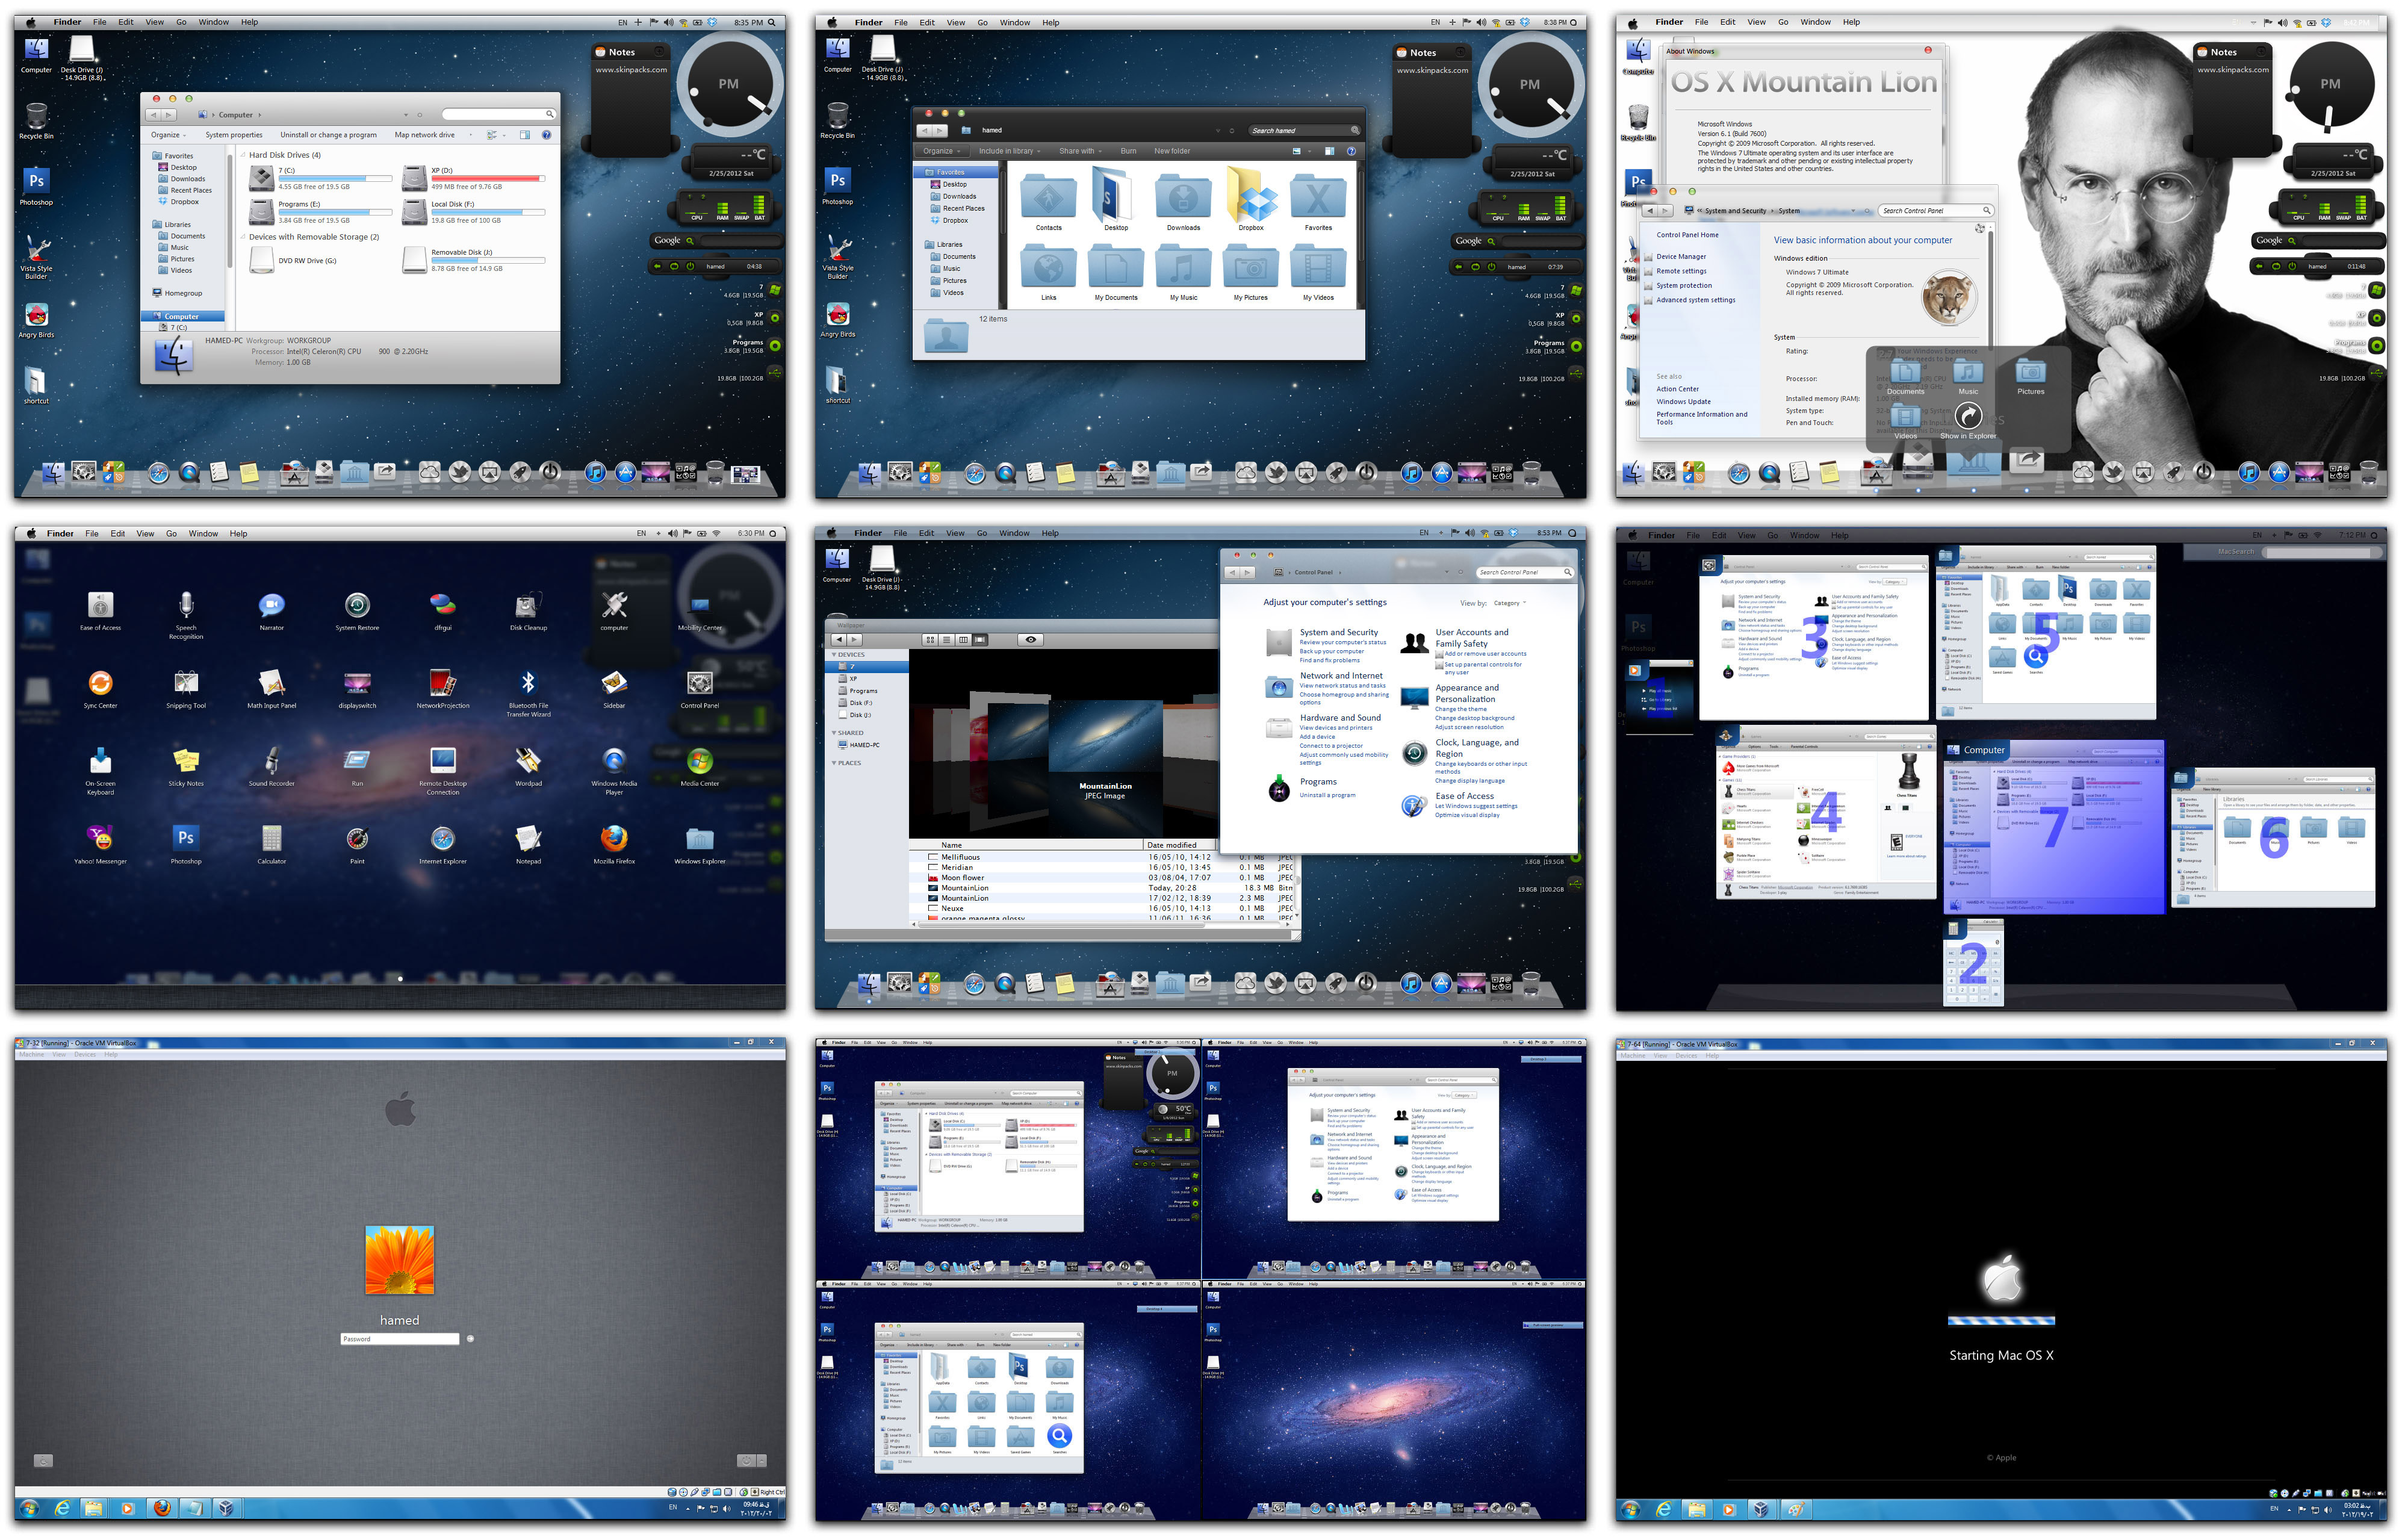 Mac Os X Lion Skin Pack for Mac - Free downloads and